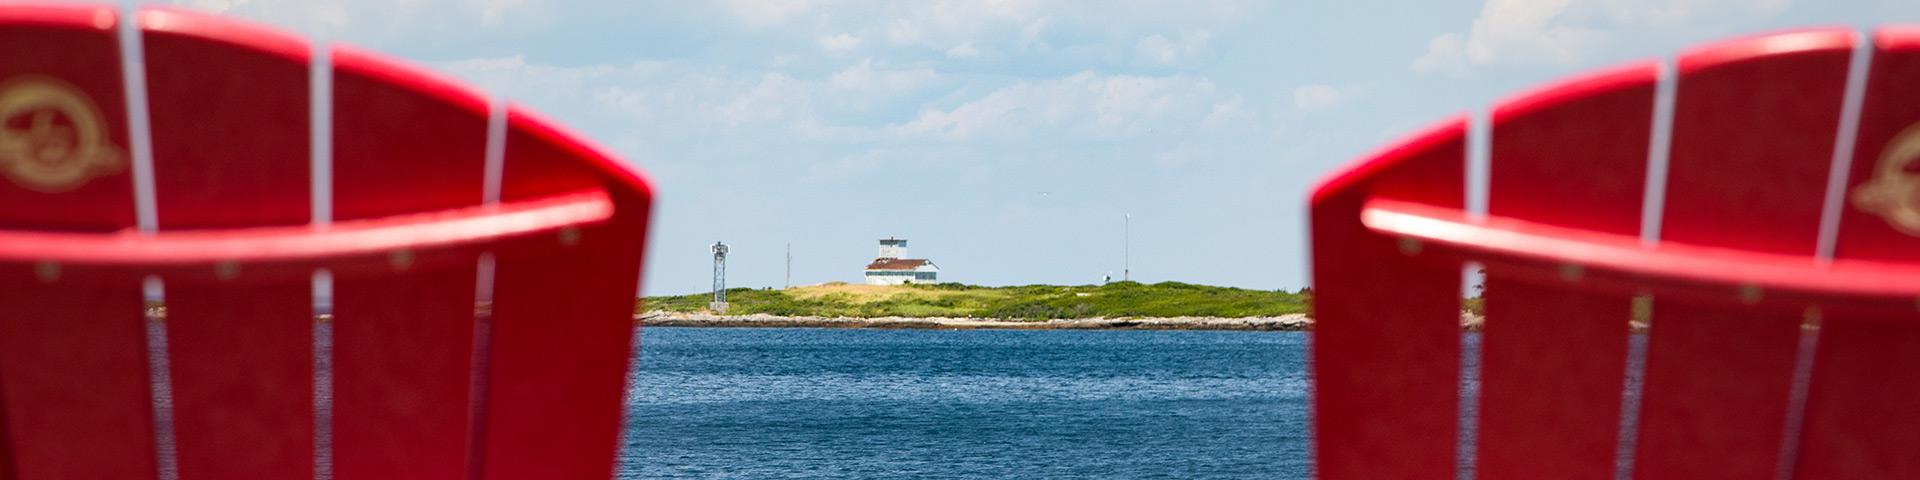 A view of Canso Island in the distance between two red chairs